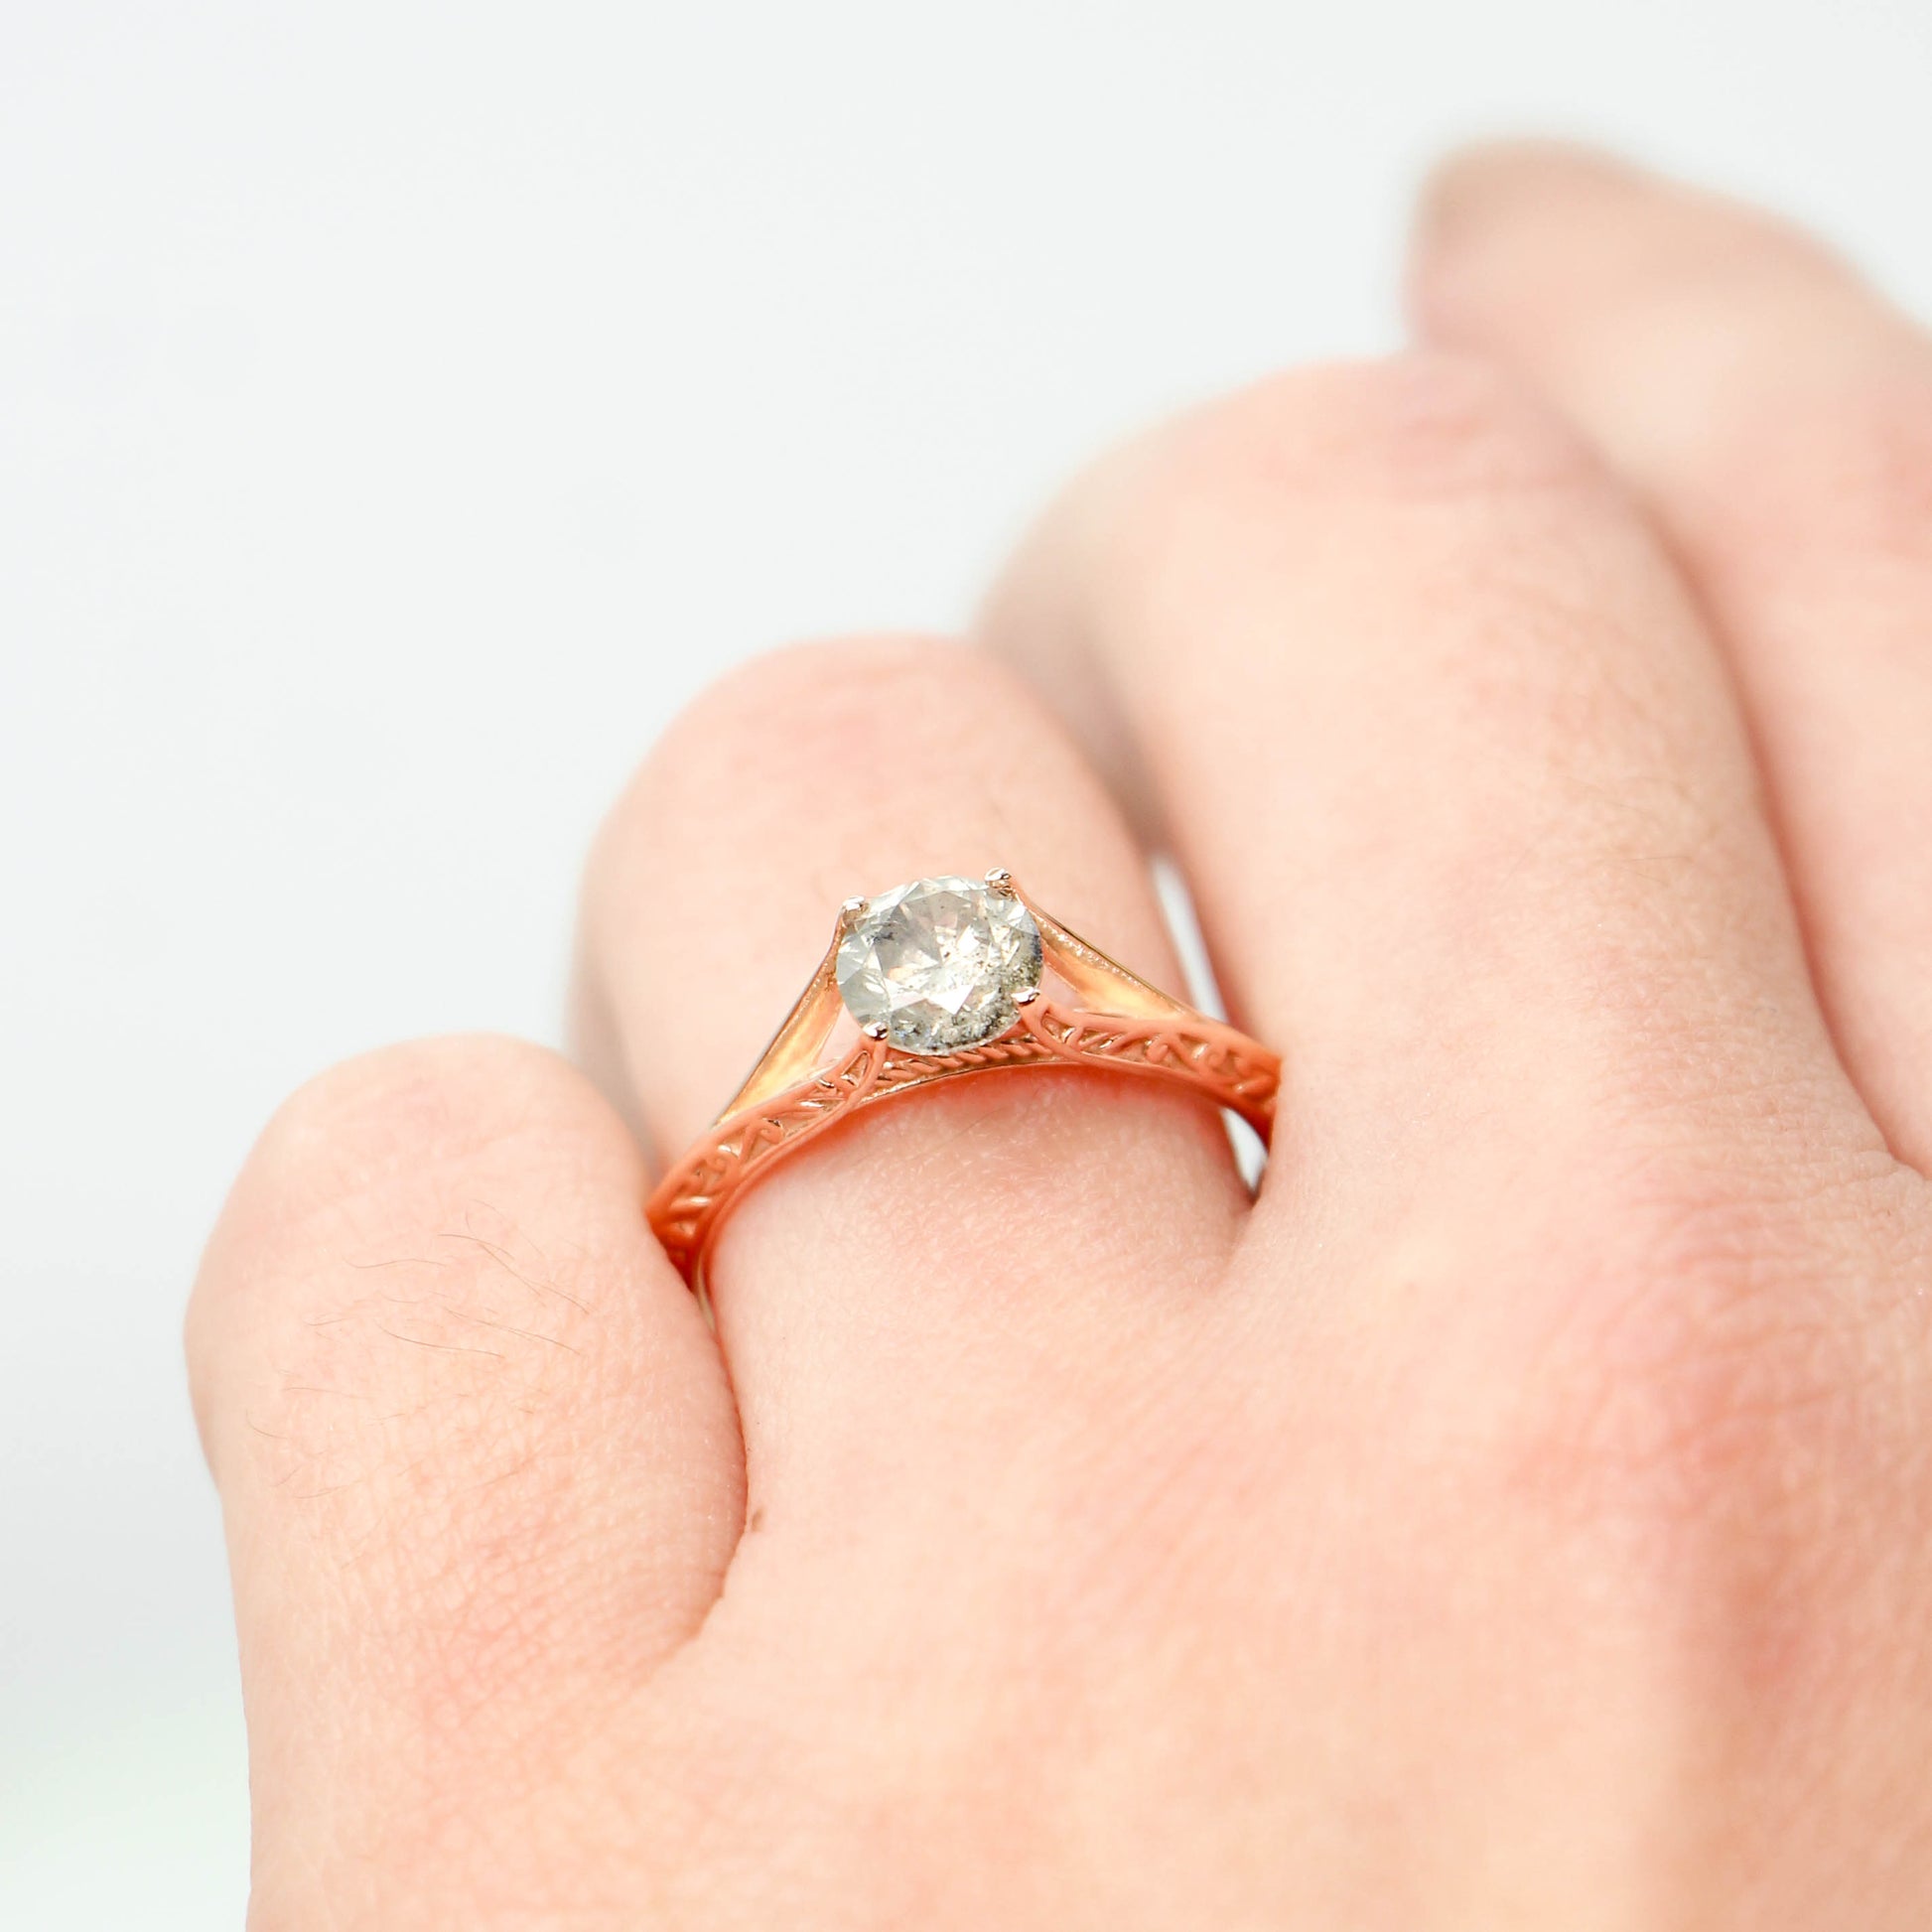 Ivy Ring with a 0.98 Carat Round Light Gray Celestial Diamond in 14k Rose Gold - Ready to Size and Ship - Midwinter Co. Alternative Bridal Rings and Modern Fine Jewelry